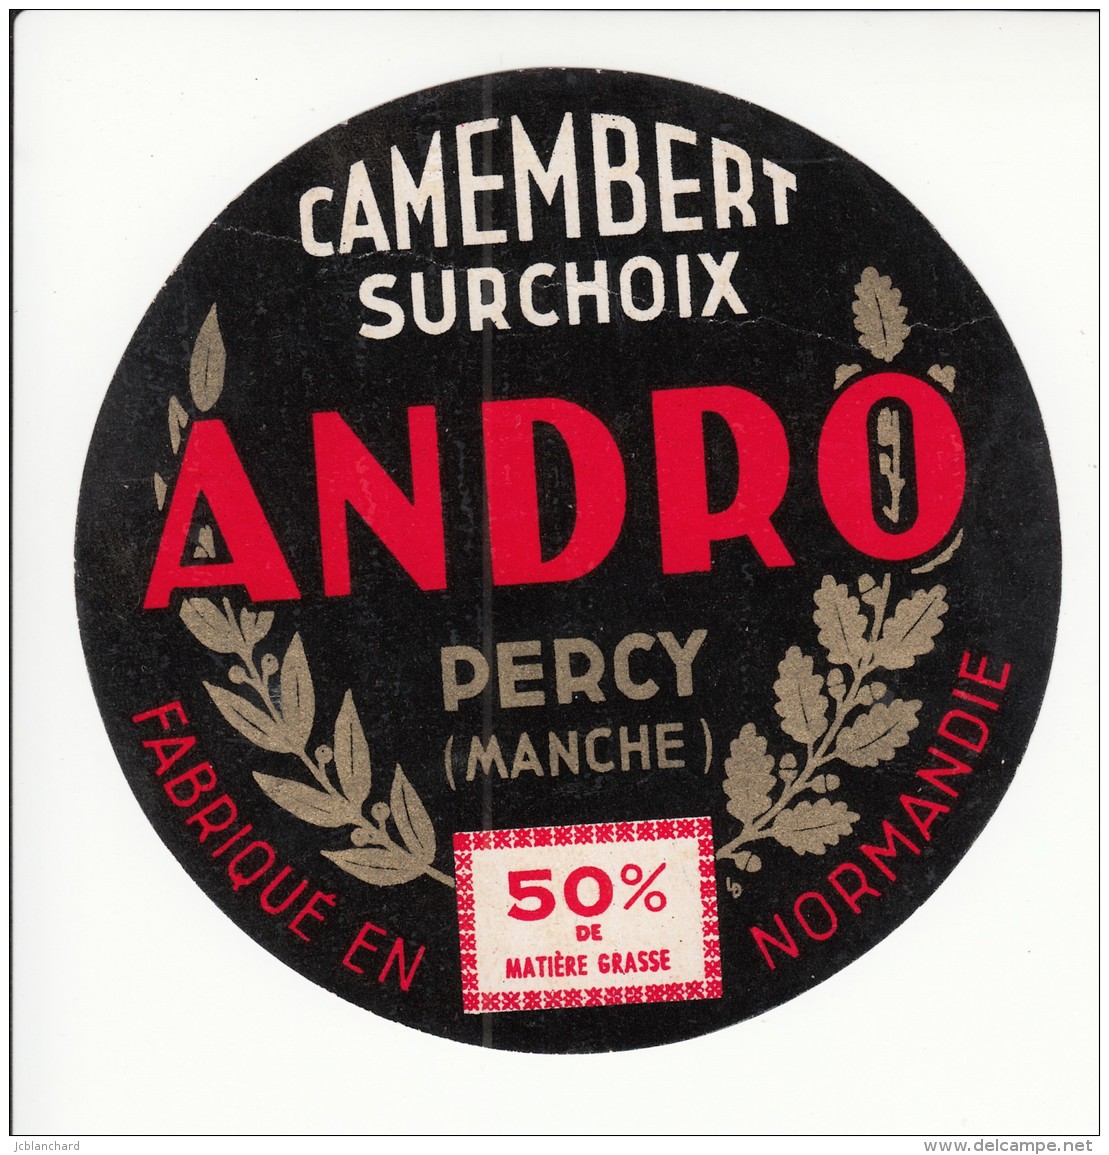 Etiquette De Fromage Camembert - Andro - Percy - Manche. - Fromage